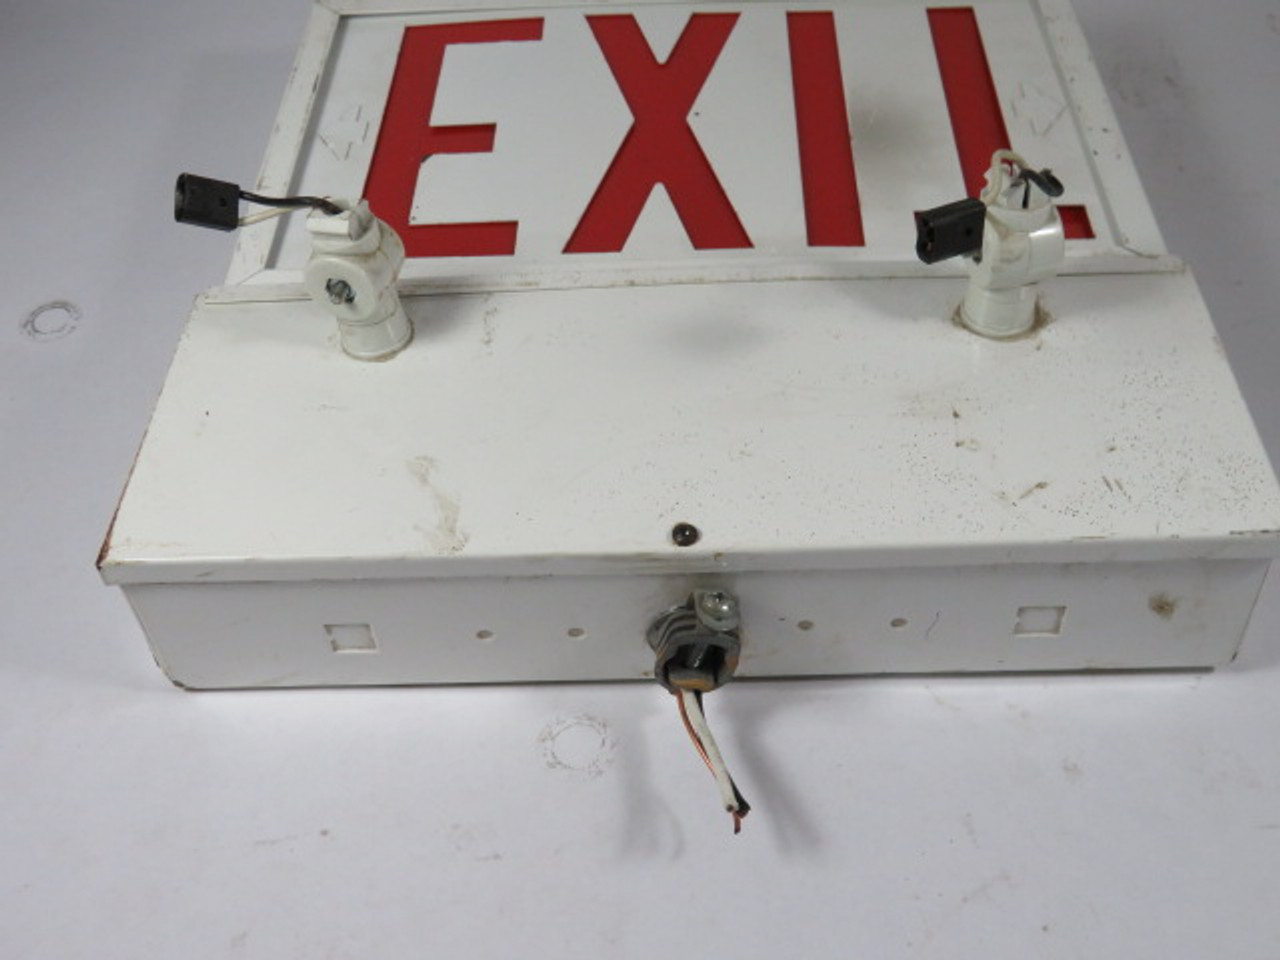 Lithonia Lighting HX-S-W-3-R-120 Incandescent Exit Sign MISSING PARTS ! AS IS !